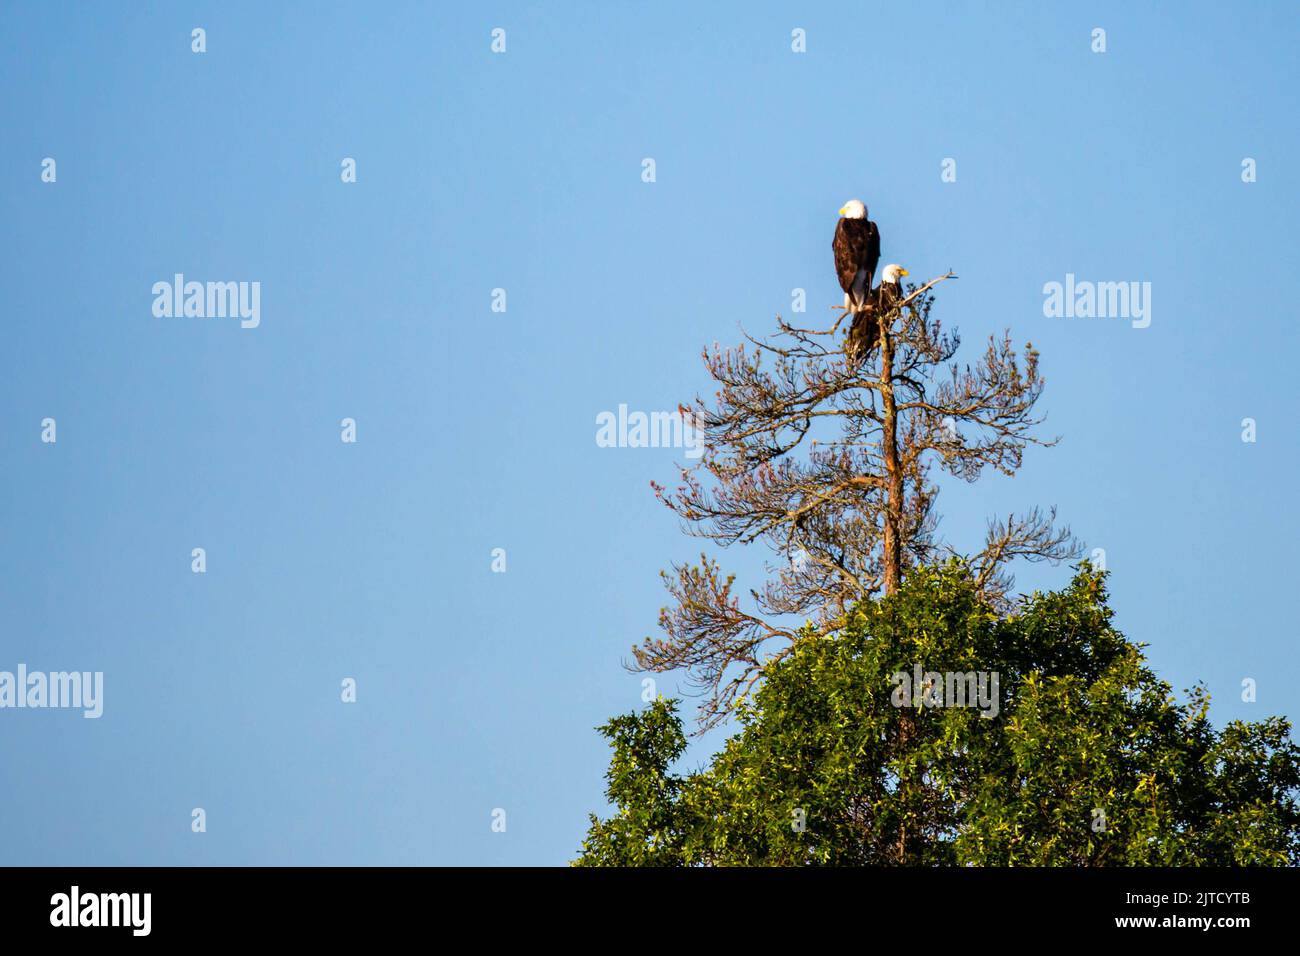 Two adult bald eagles (Haliaeetus leucocephalus) perched on a branch with copy space, horizontal Stock Photo